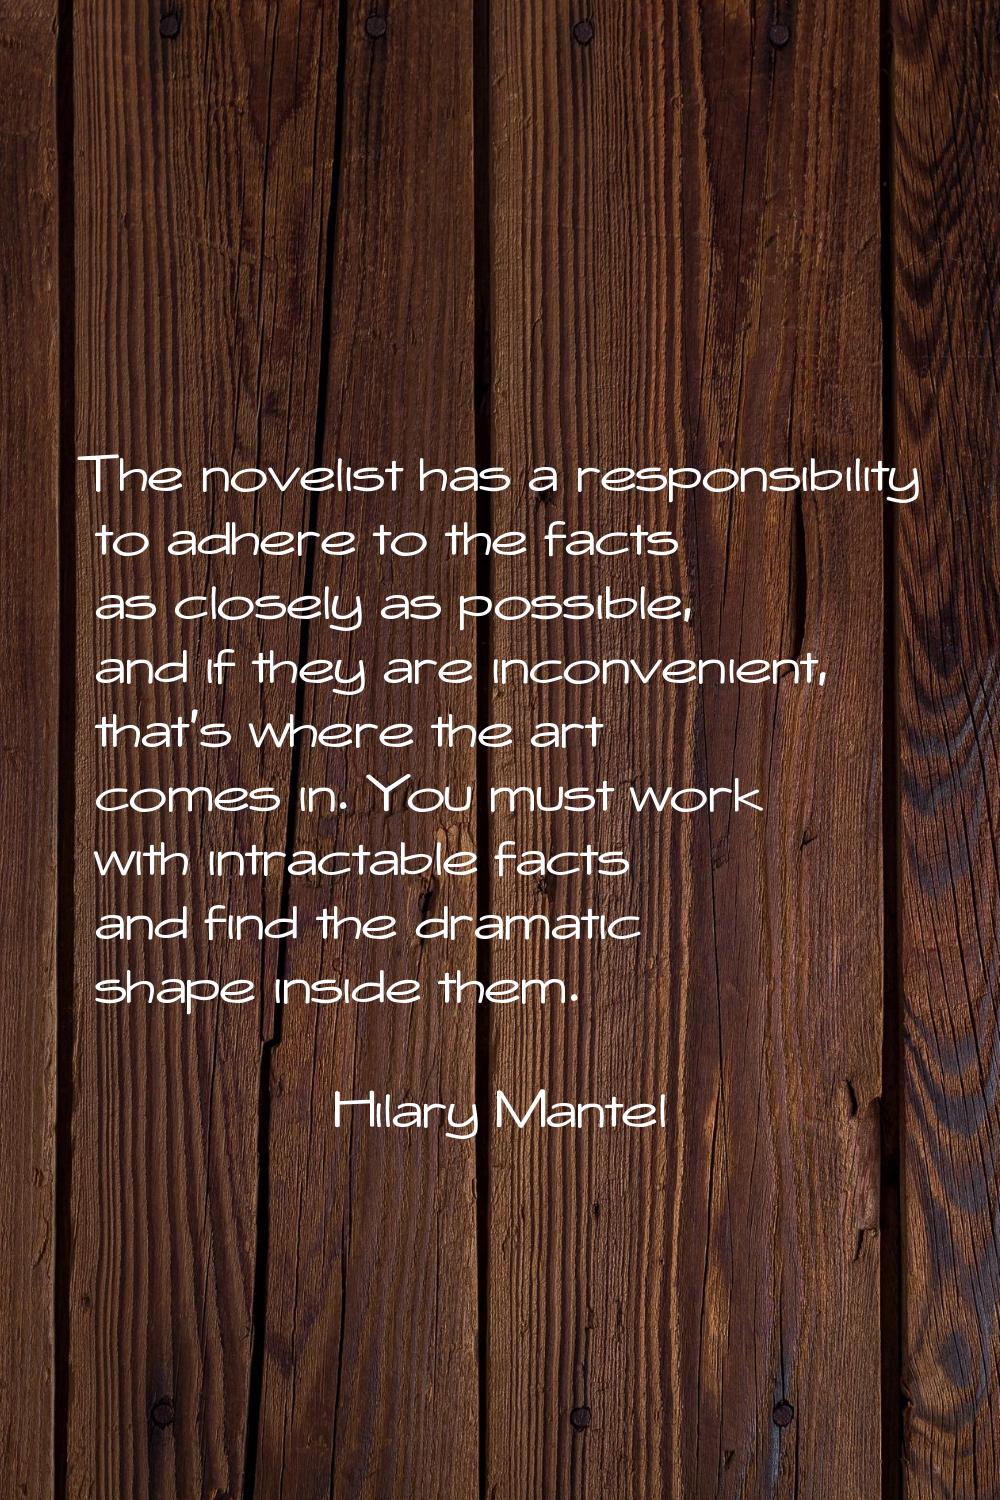 The novelist has a responsibility to adhere to the facts as closely as possible, and if they are in